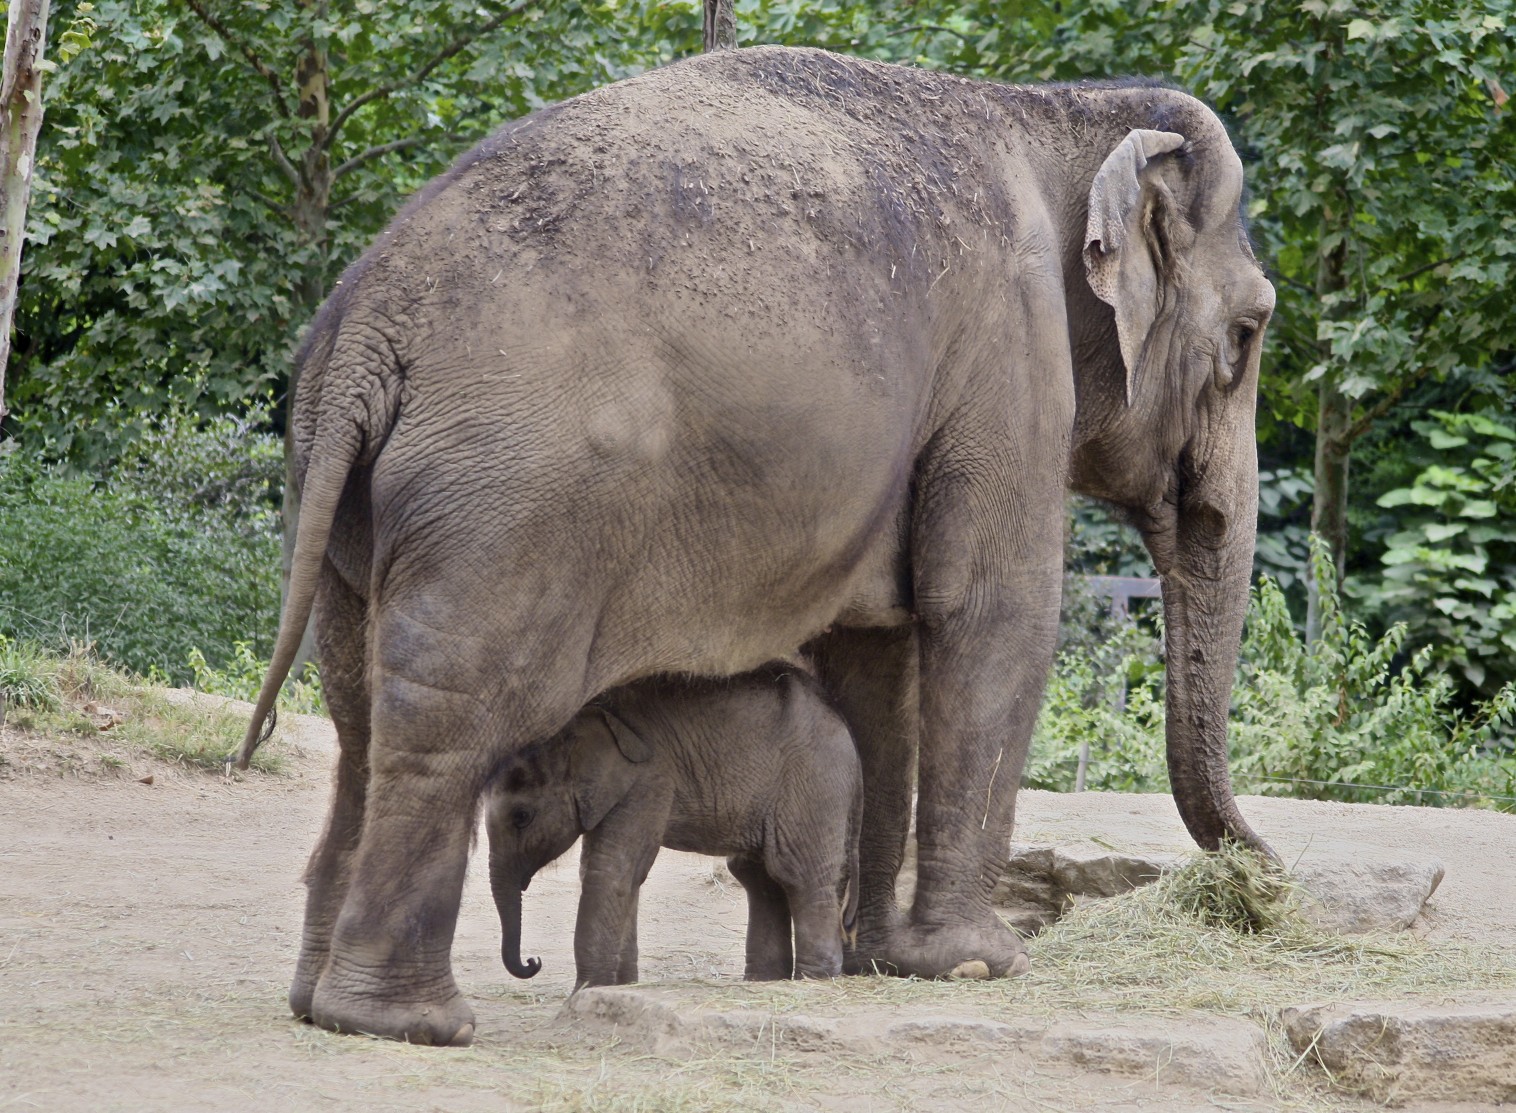 an elephant with her young standing on a dirt path